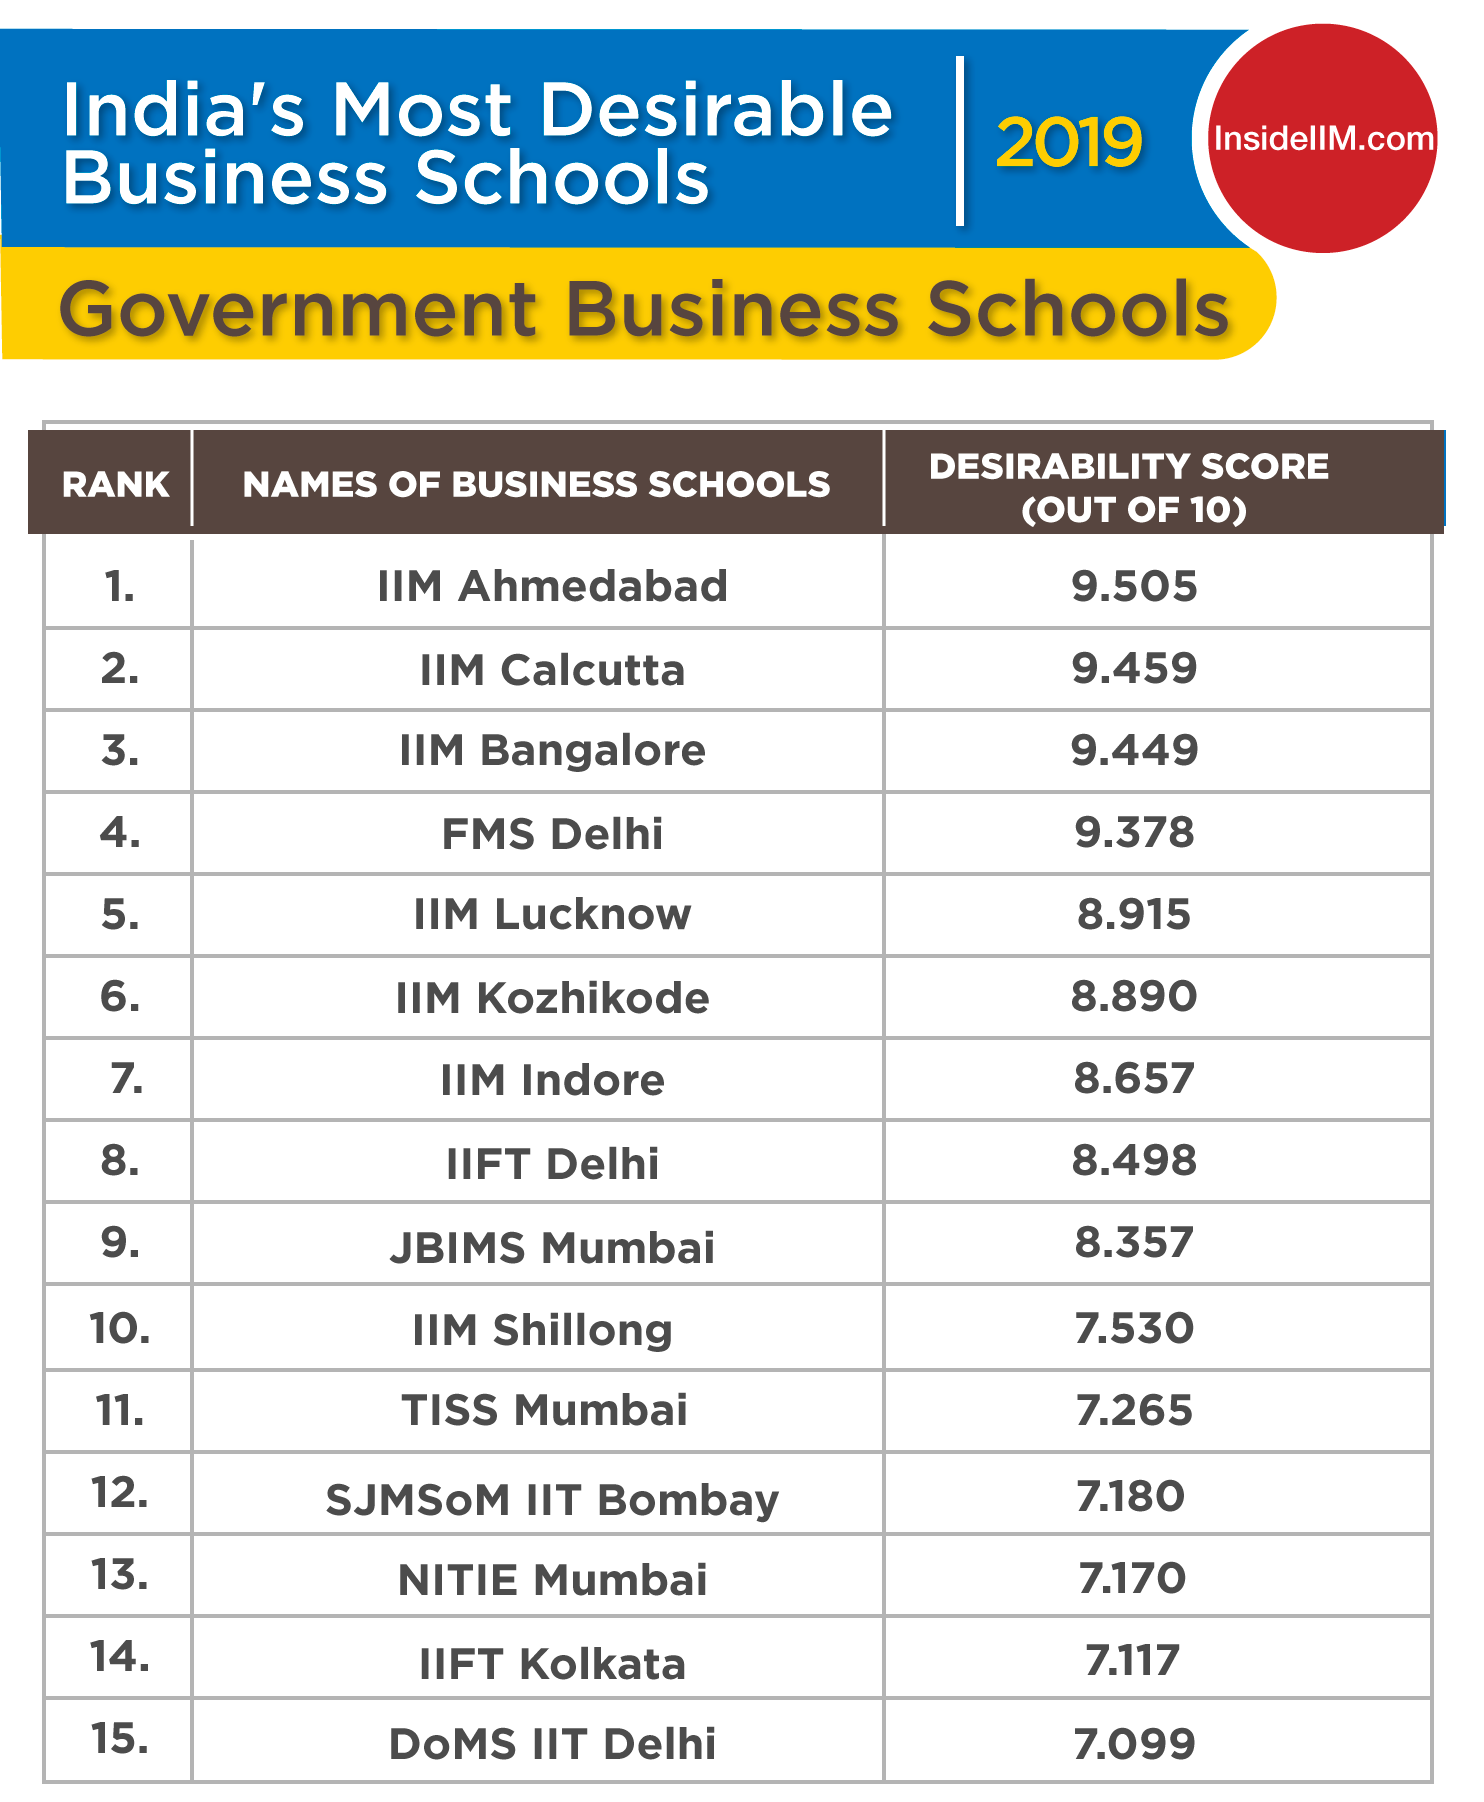 Top MBA Colleges in India 2019 - Ownership: Government